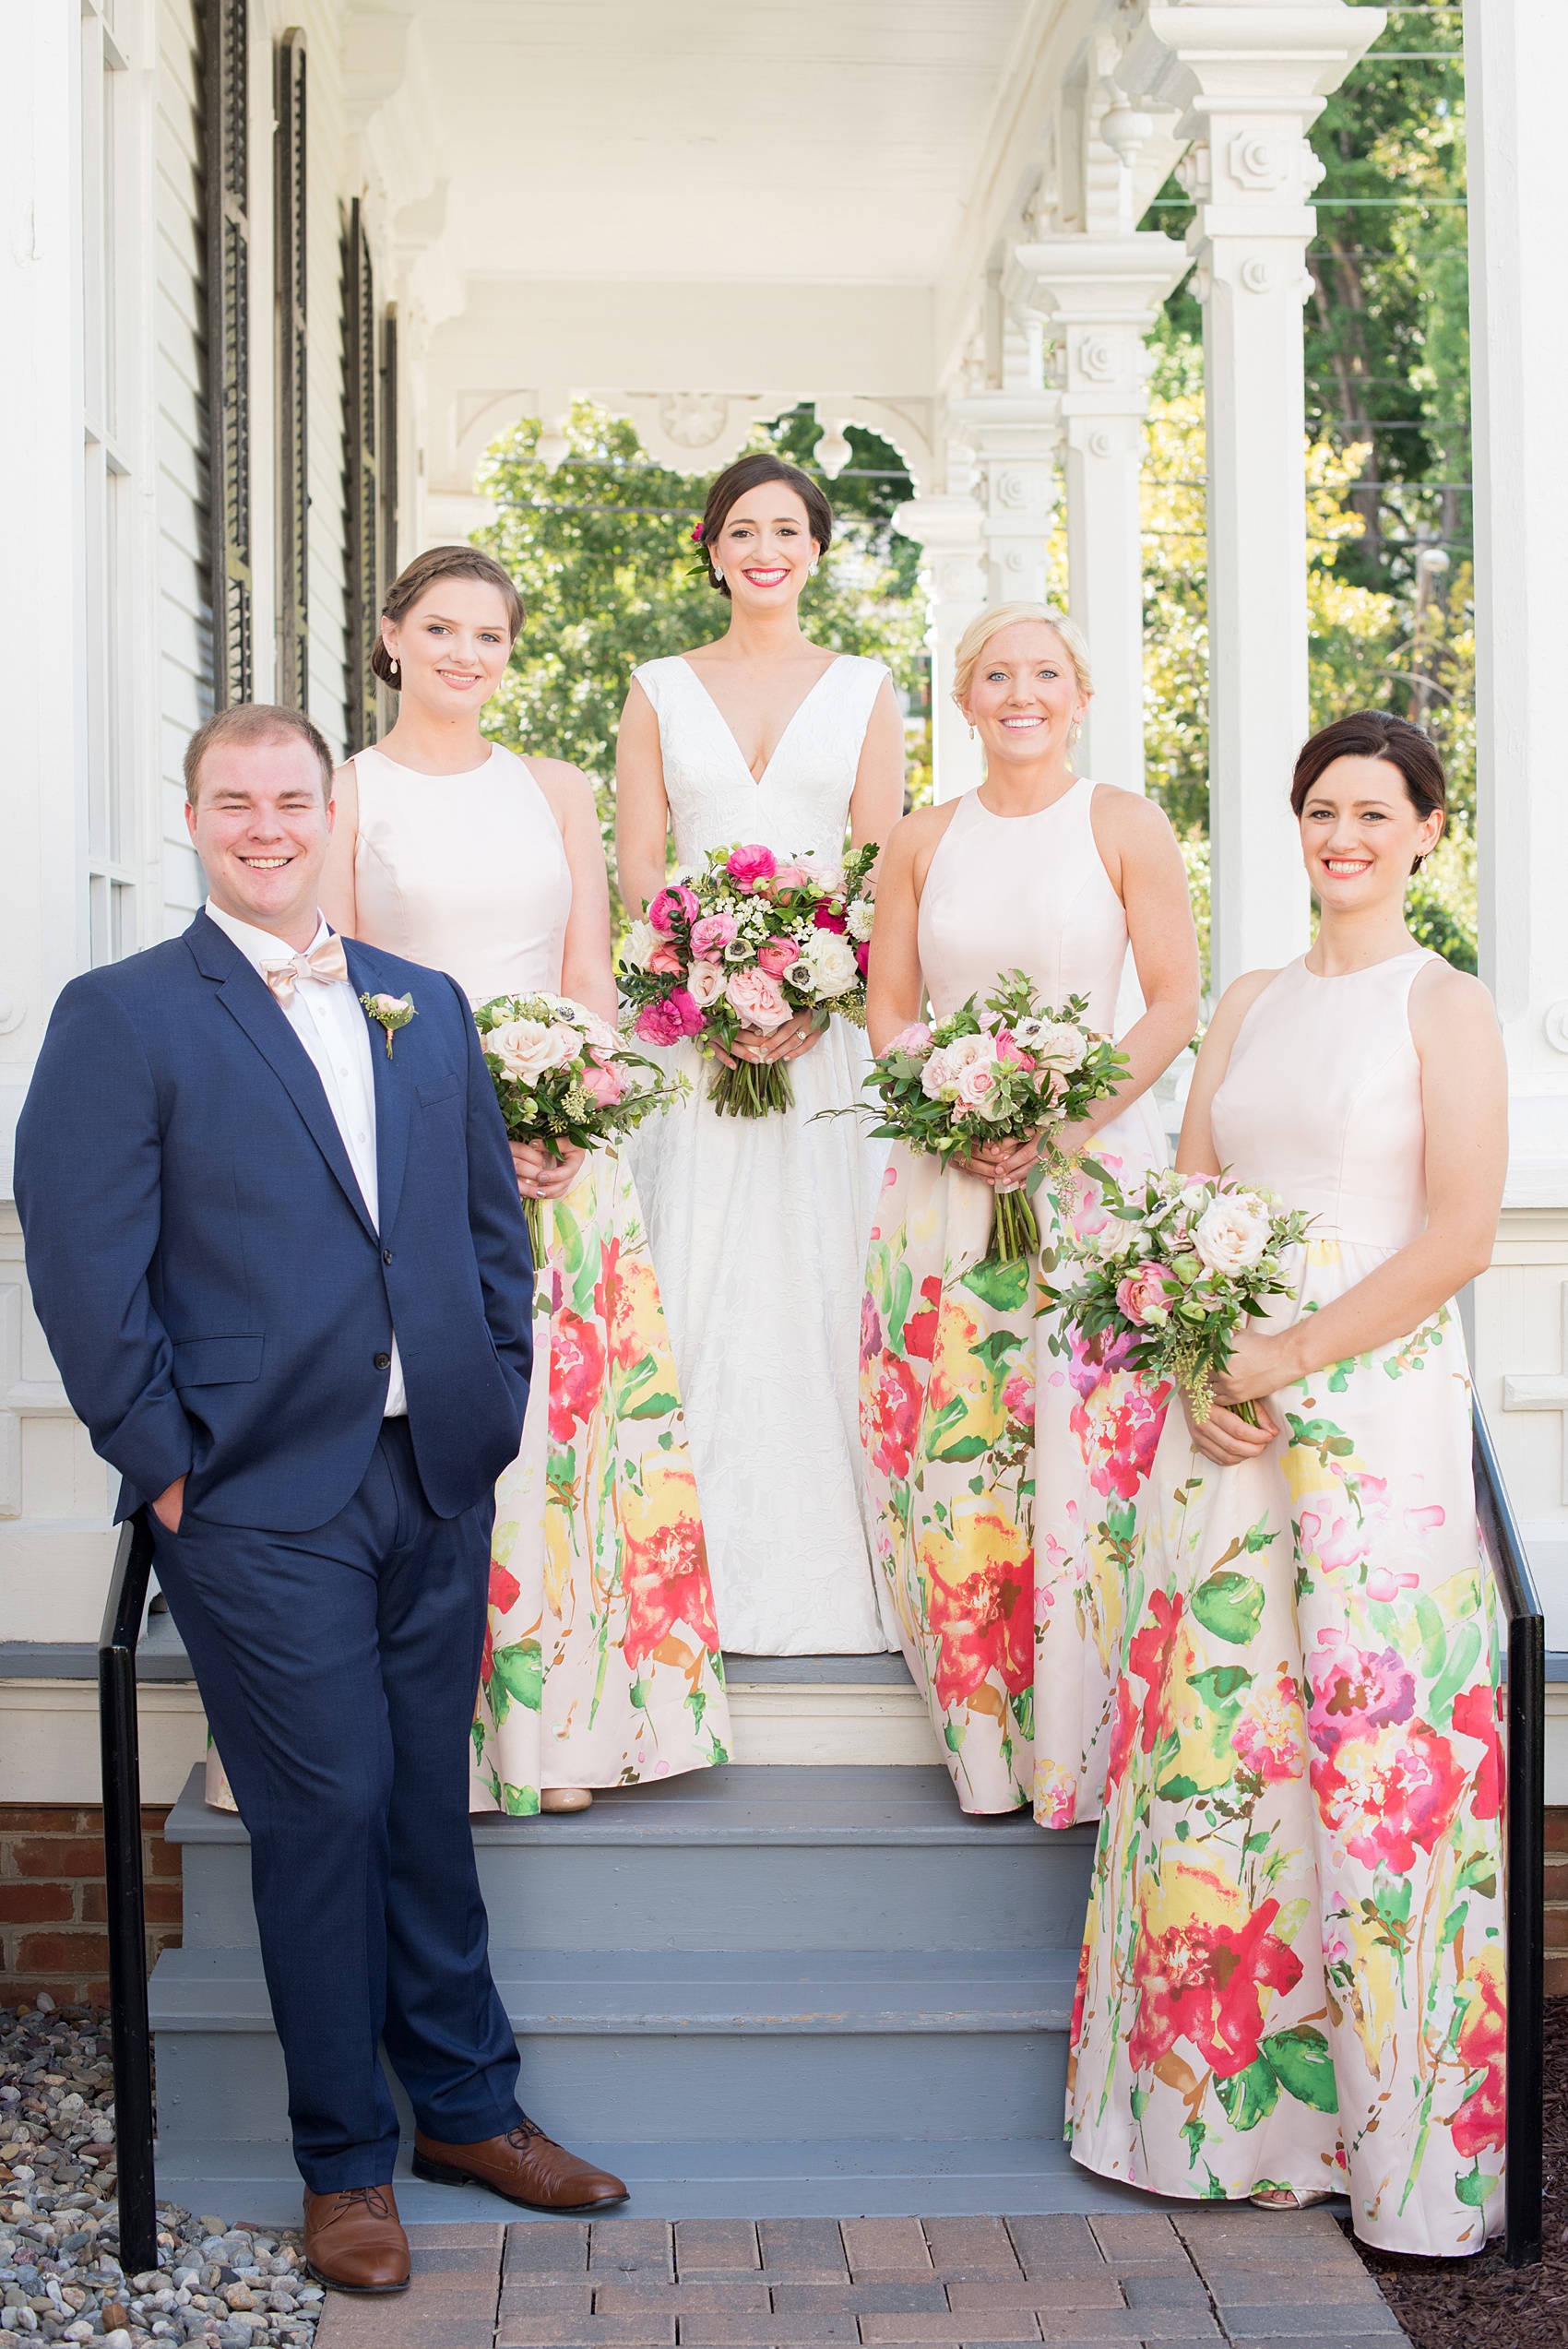 Mikkel Paige Photography pictures from a wedding at Merrimon-Wynne House in Raleigh, NC. Photo of the bridal party on the porch of the historic home. The bridesmaids wore pink dresses with a colorful floral pattern.